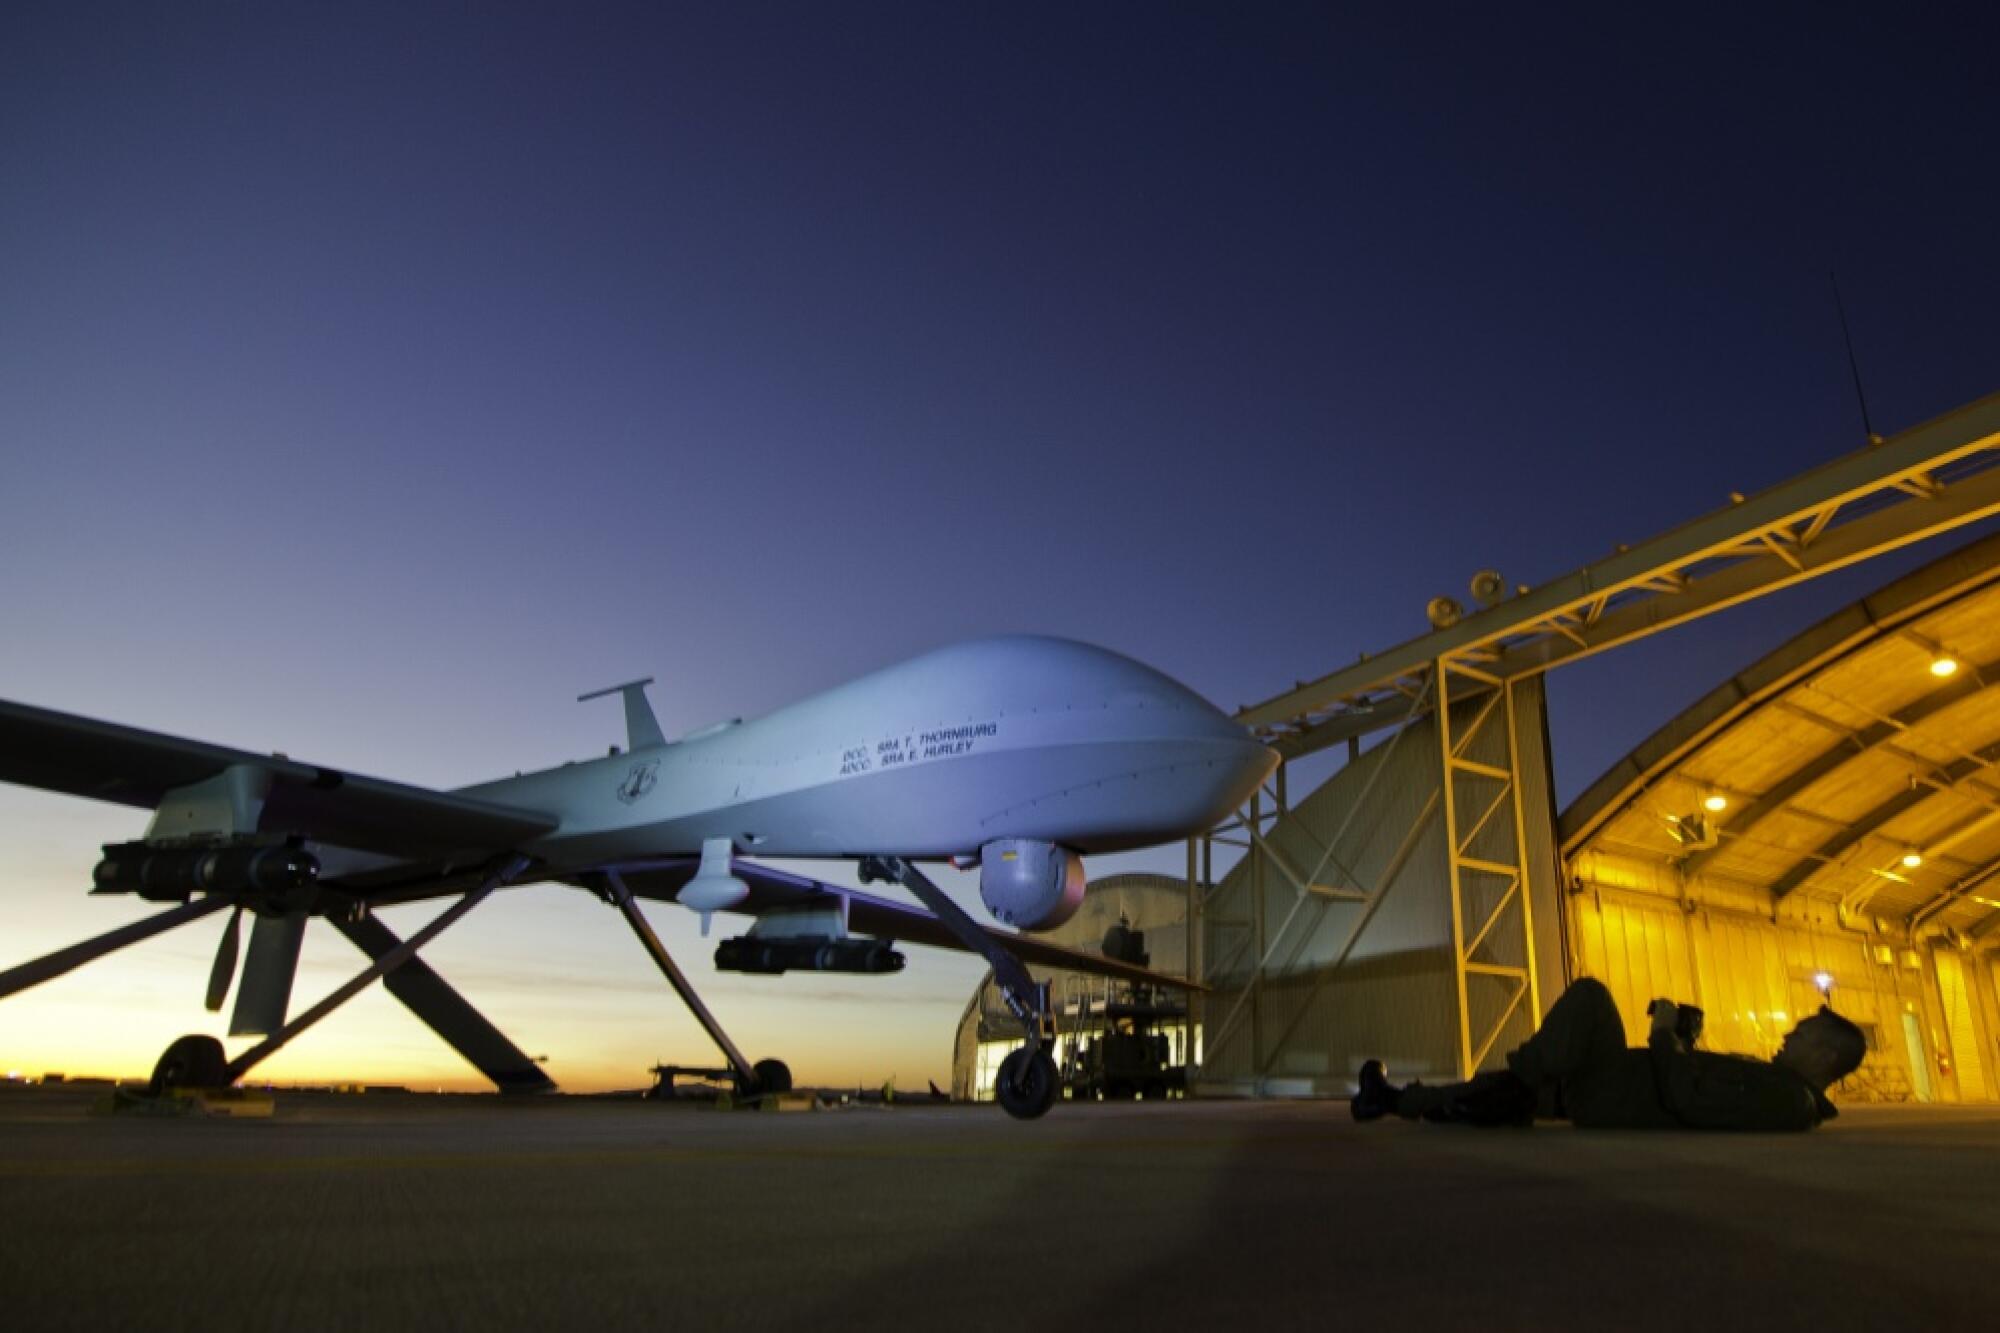 MQ-1 Predator is shown during post-flight inspection at dusk in Victorville, Calif.